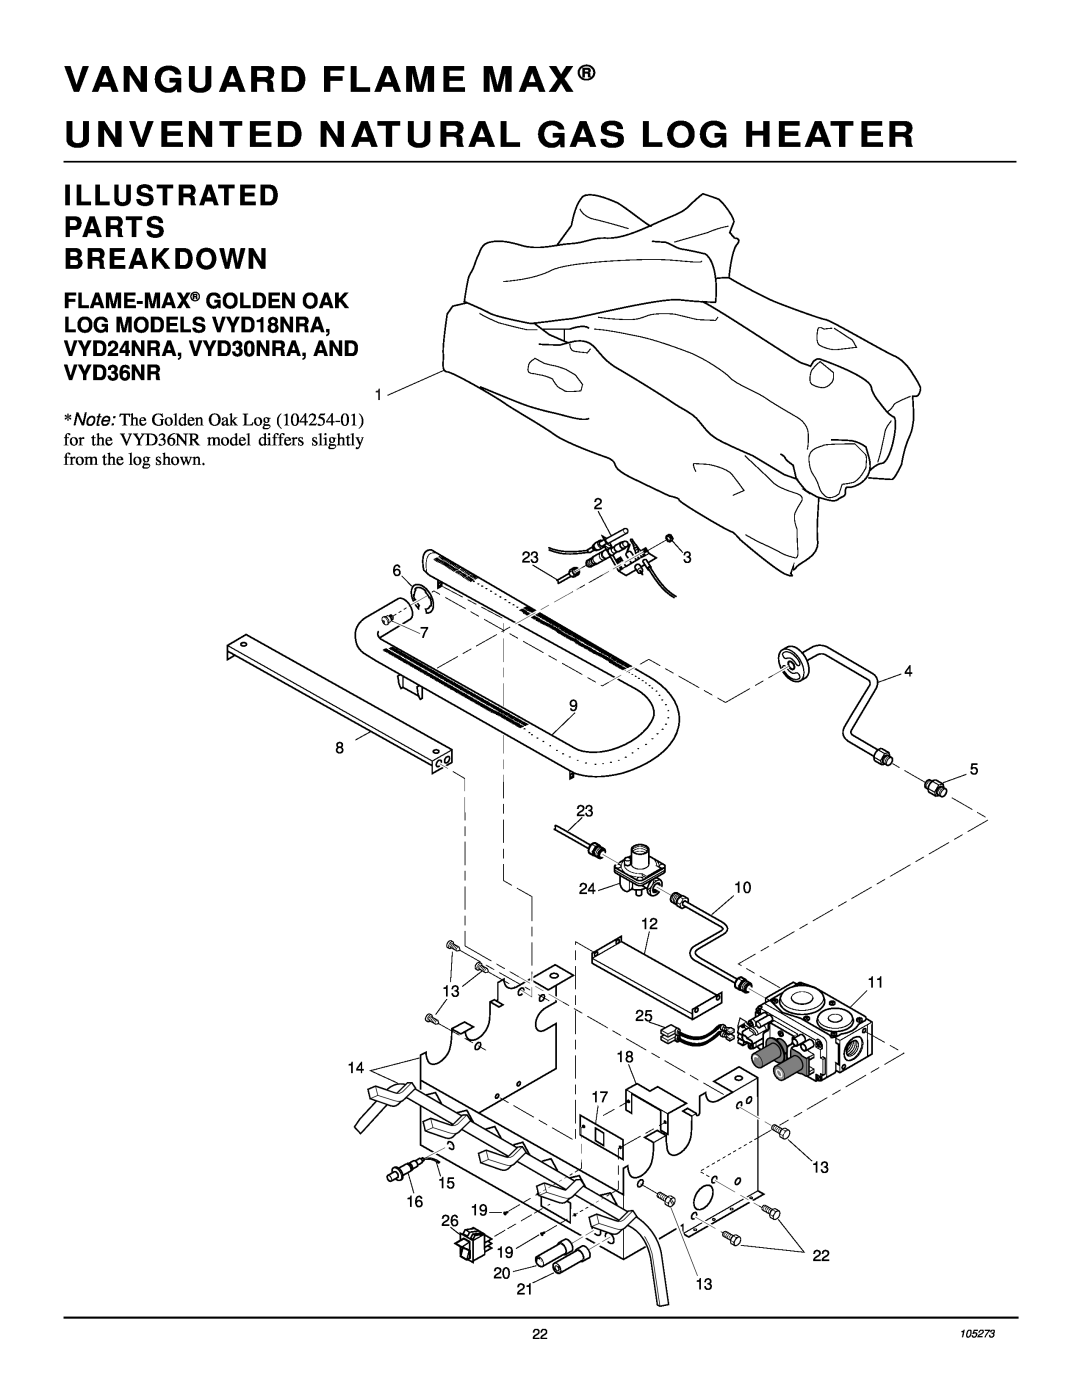 Vanguard Heating UNVENTED (VENT-FREE) NATURAL GAS LOG HEATER Illustrated Parts Breakdown, Vanguard Flame Max, 2113, 105273 